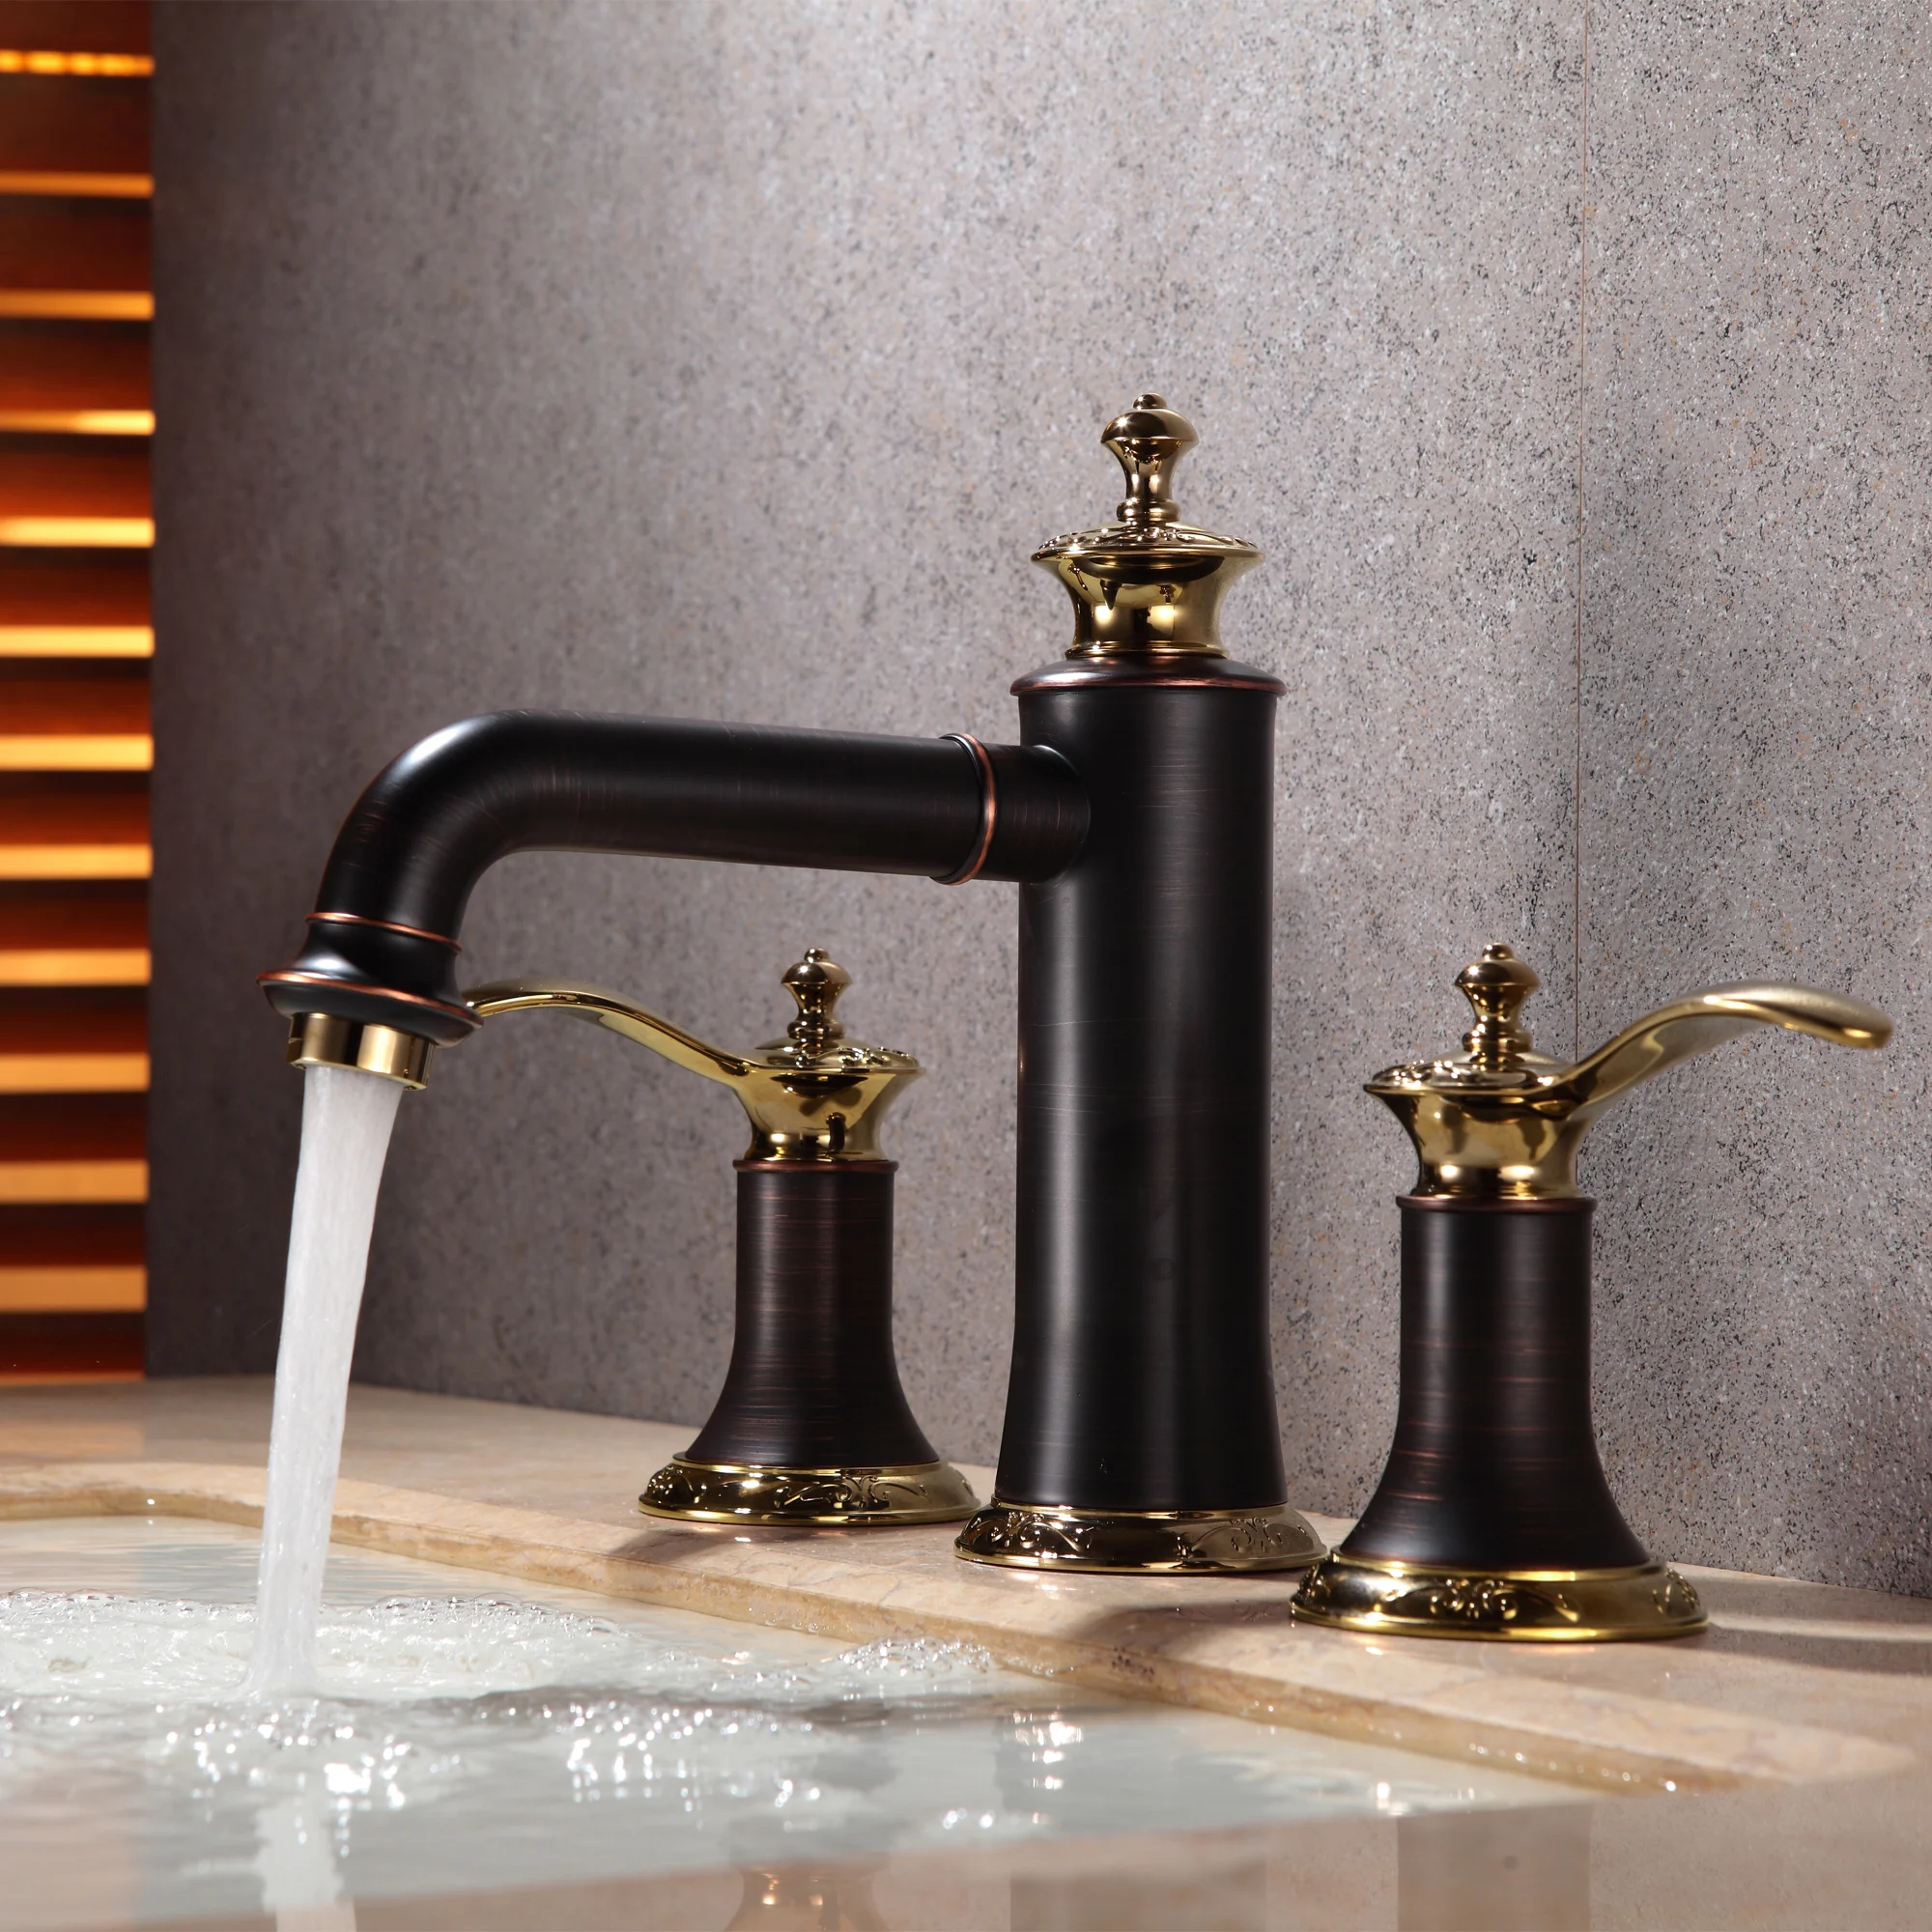 The single-hole faucet for sink made from oil rubbed bronze